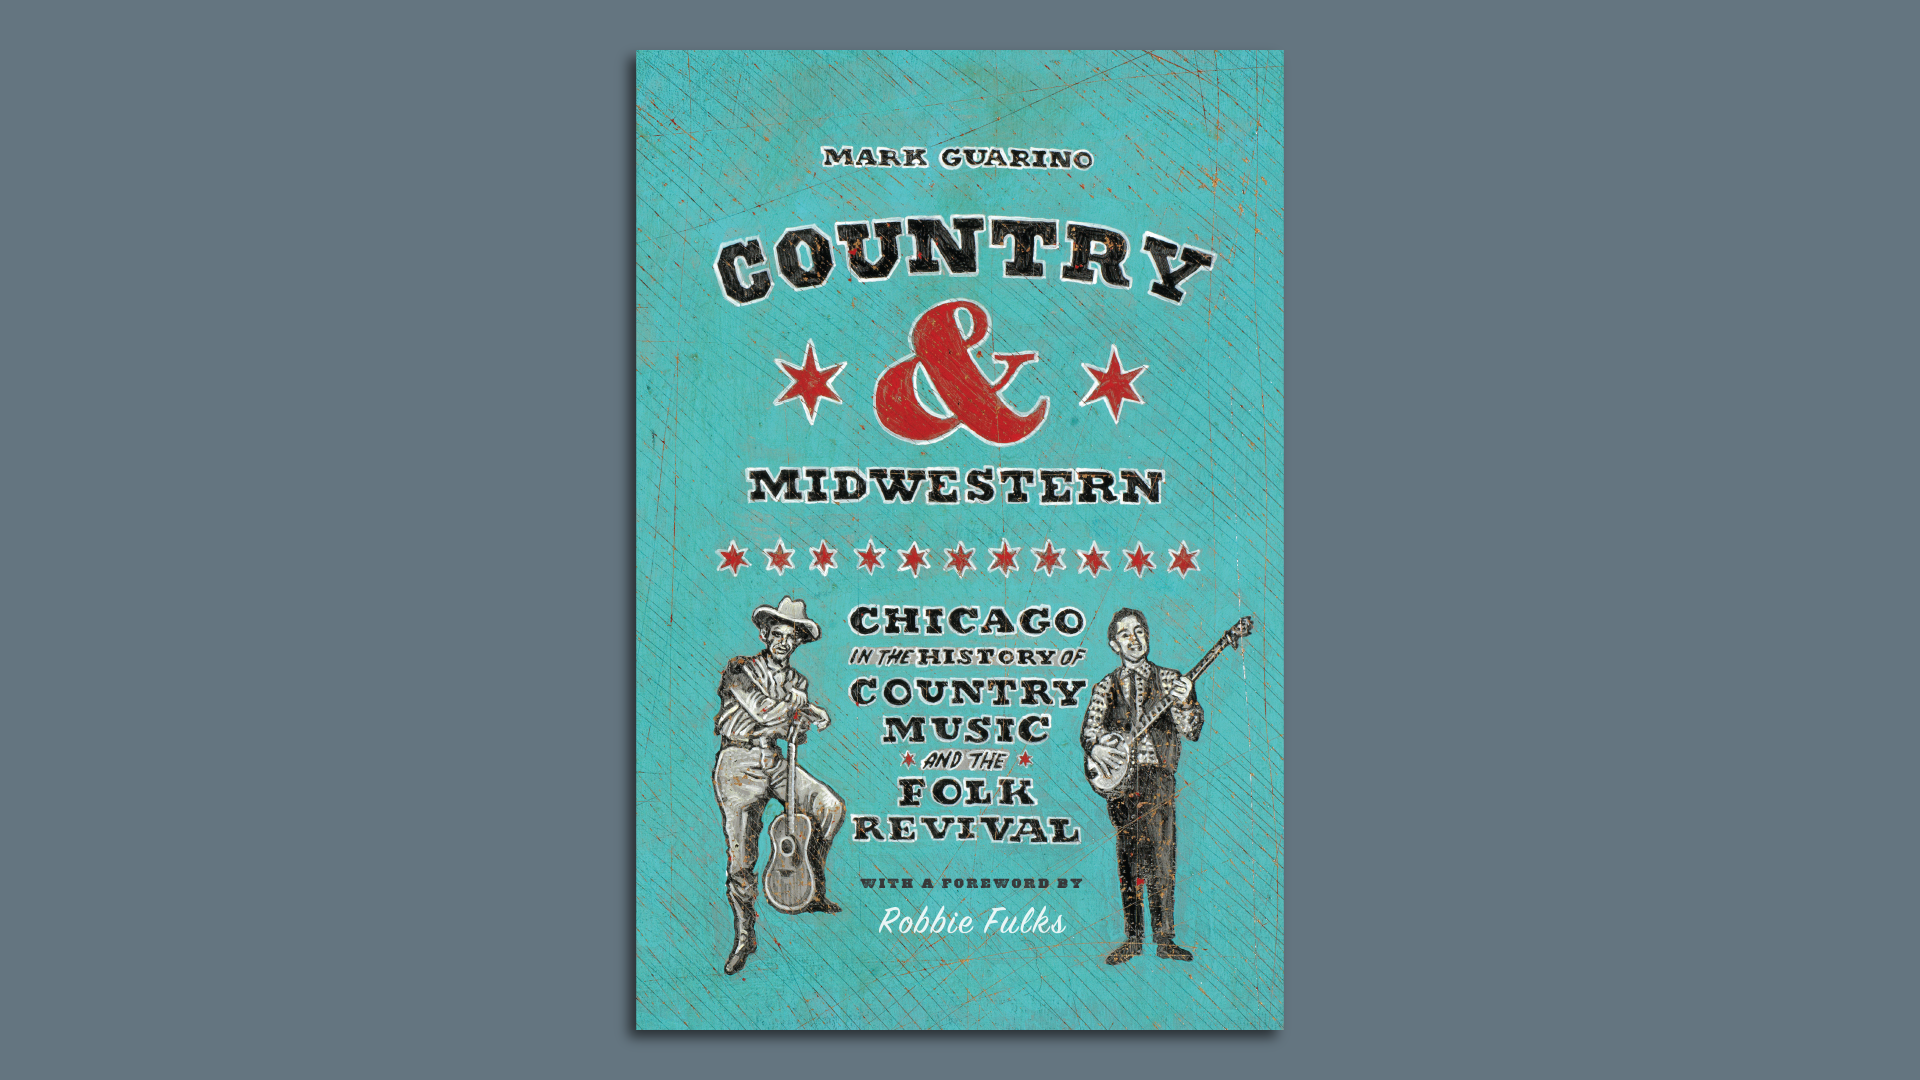 Photo of the cover of a book called "Country & Midwestern"